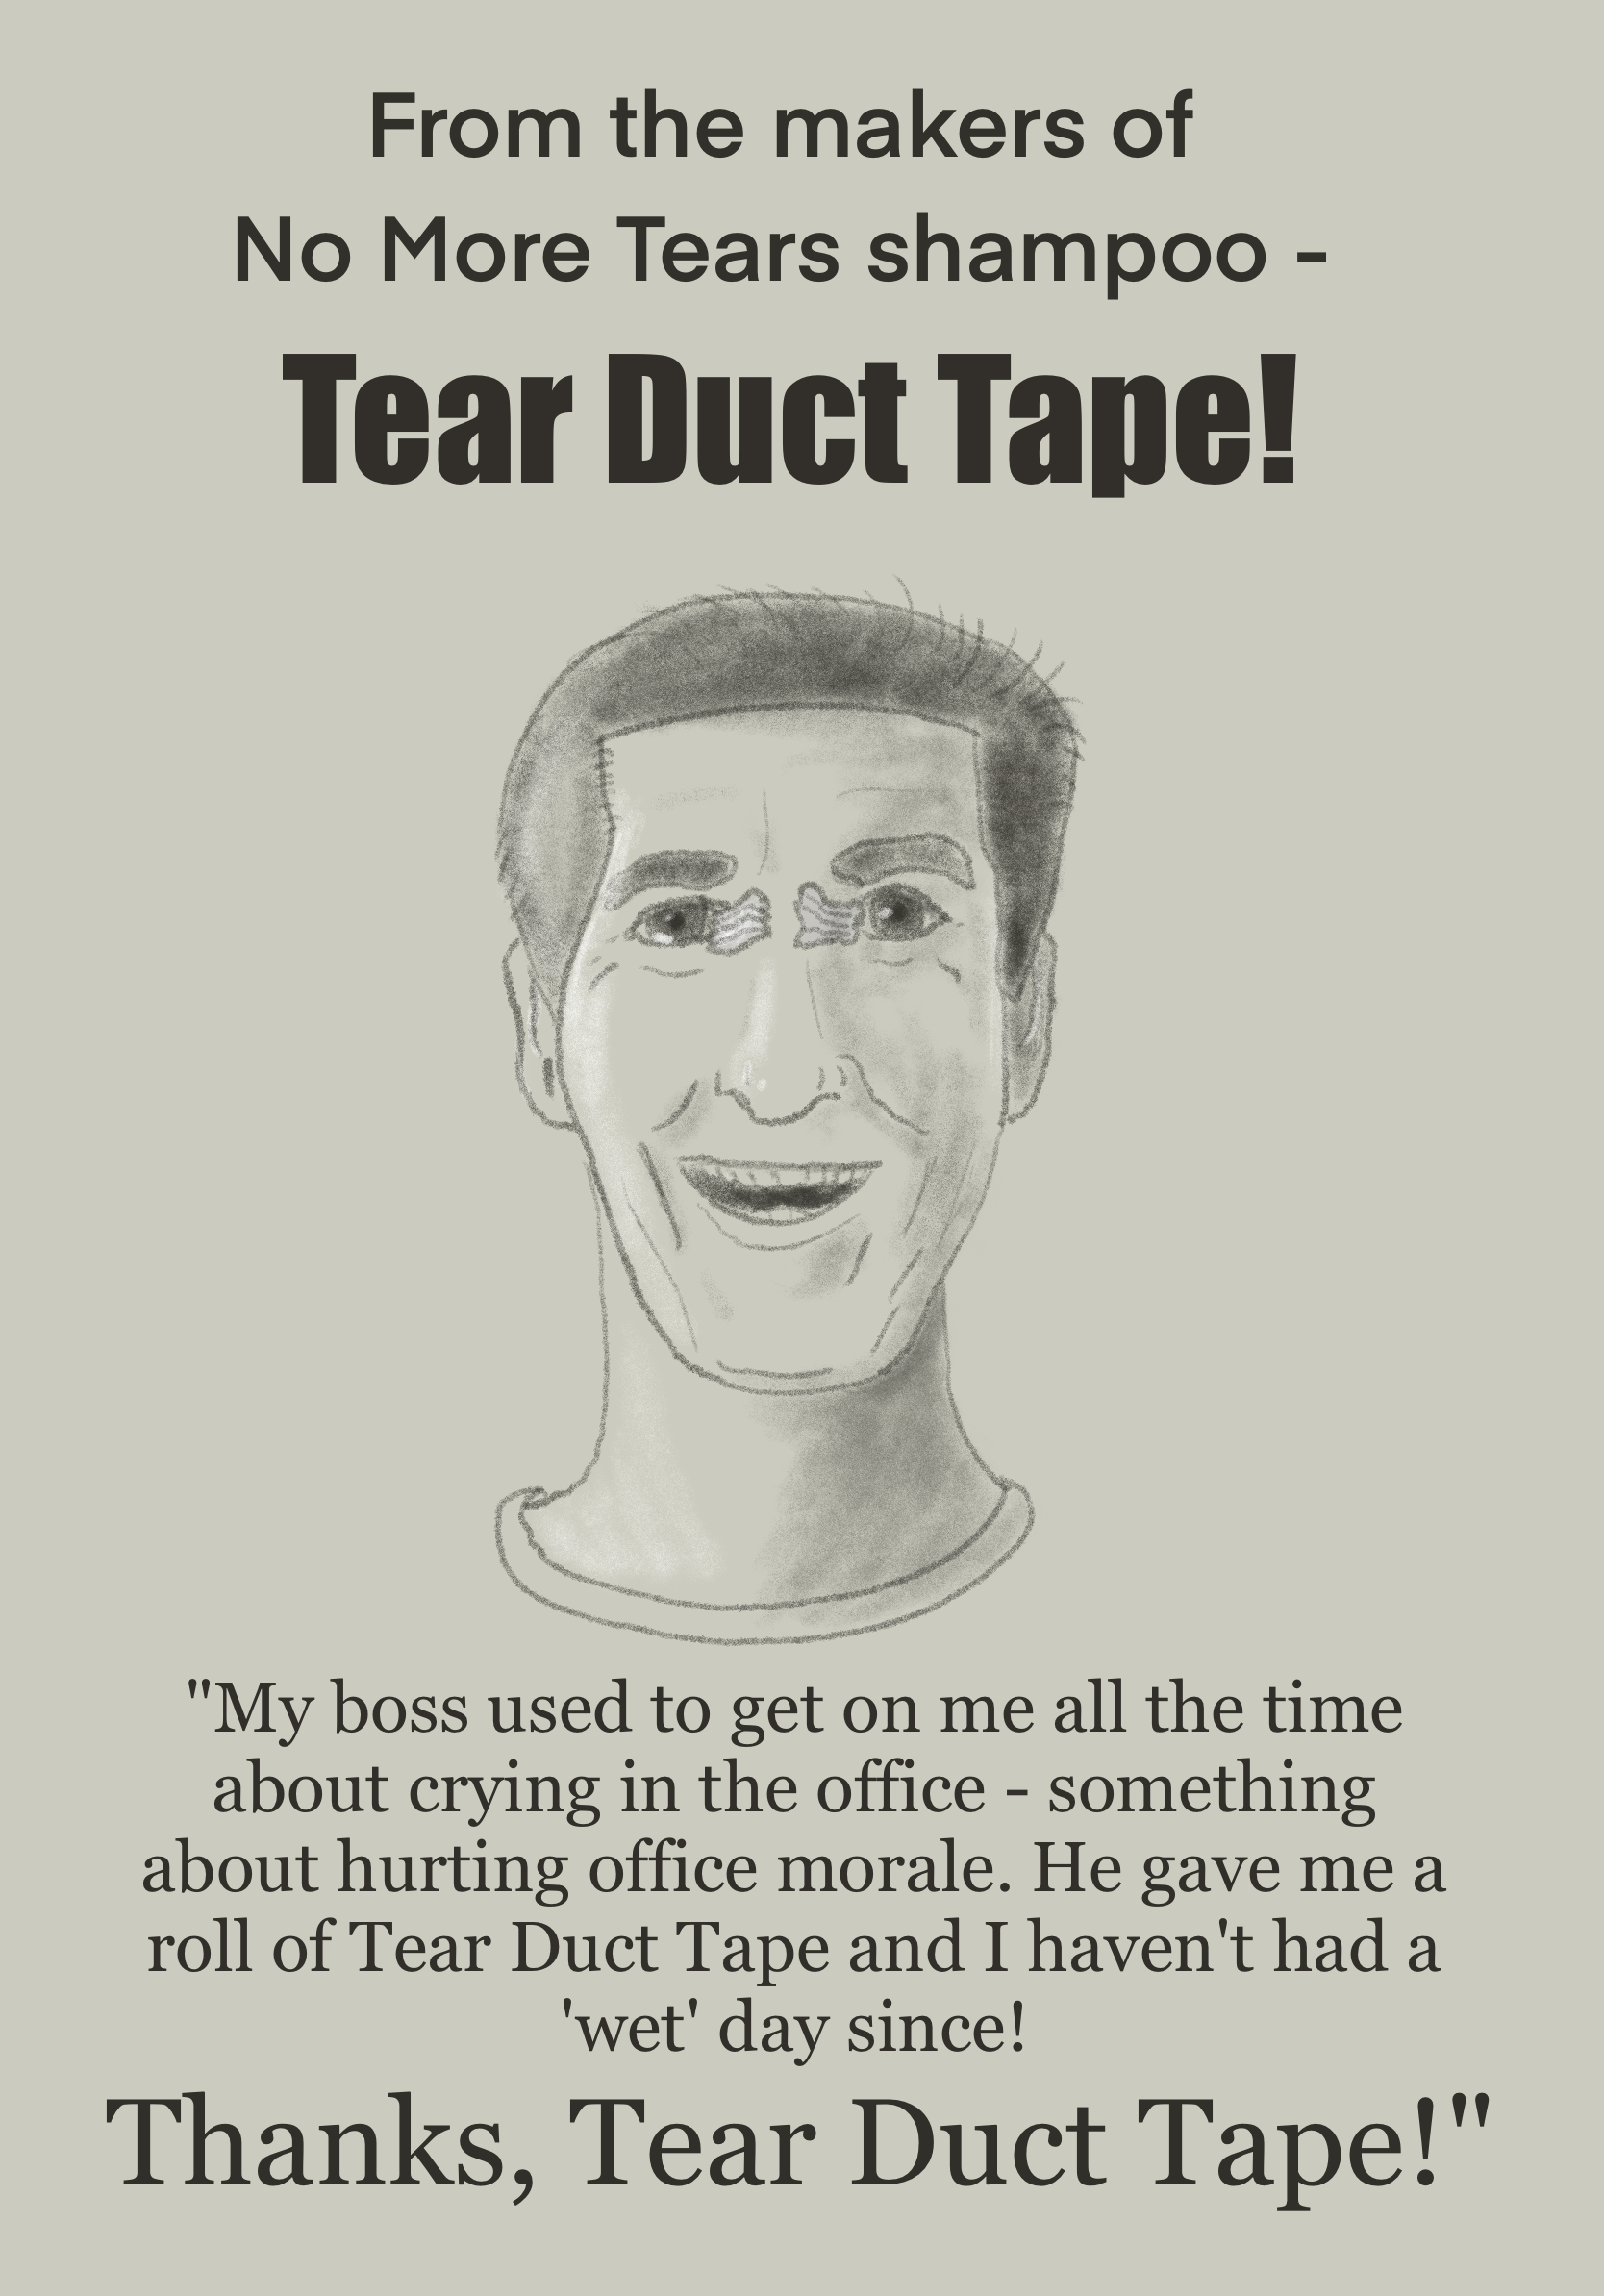 Advertisement poster. "From the makers of No More Tears shampoo - Tear Duct Tape!" Smiling (manic?) face with silvery duct tape covering tear ducts. Underneath: "My boss used to get on me all the time about crying in the office - something about hurting office morale. He gave me a roll of Tear Duct Tape and I haven't had a 'wet' day since! Thanks, Tear Duct Tape!"